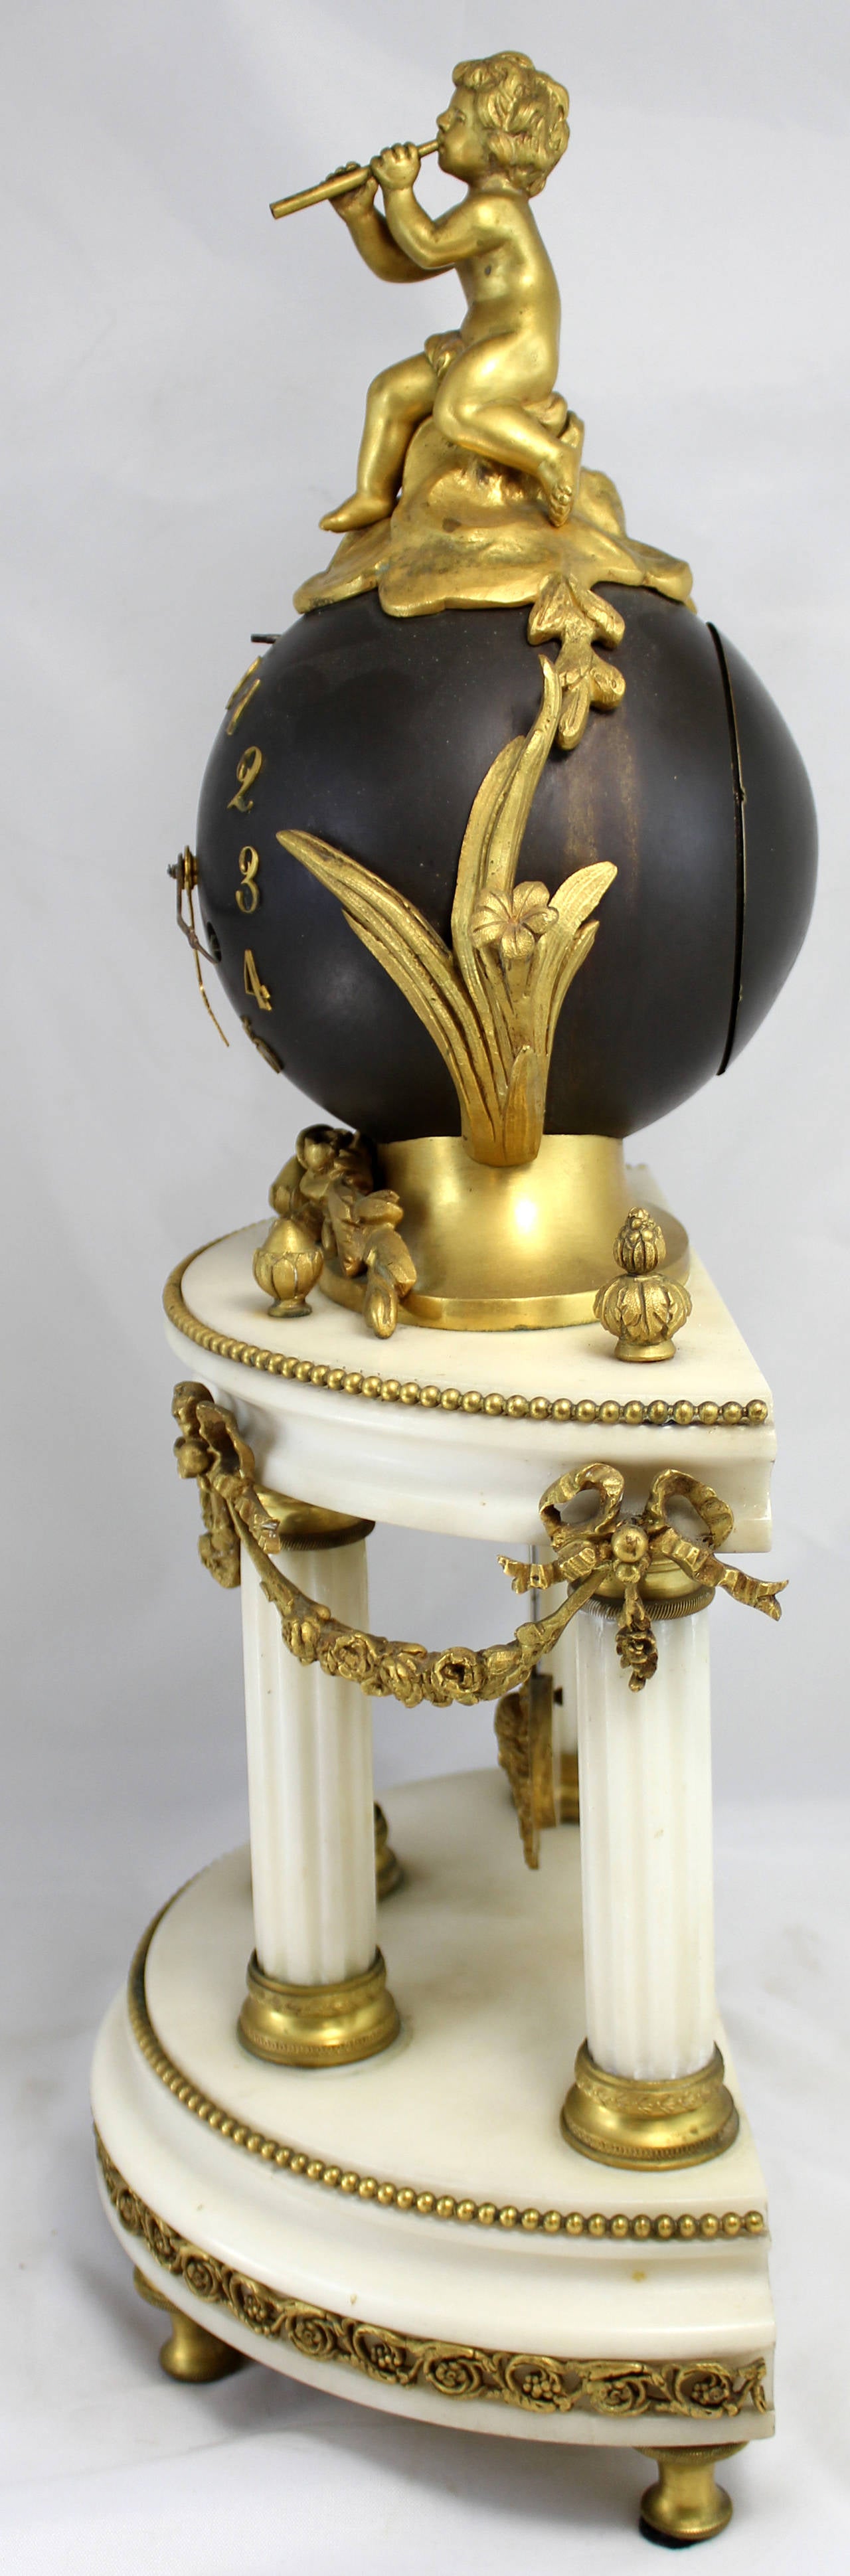 A 19th century French bronze ormolu figural clock on a demilune columned base, gilt ormolu mounts, snake form clock hands, and a putti figure sitting with flute  on the top of the globe. The brass movement is signed S H Paris. In good working